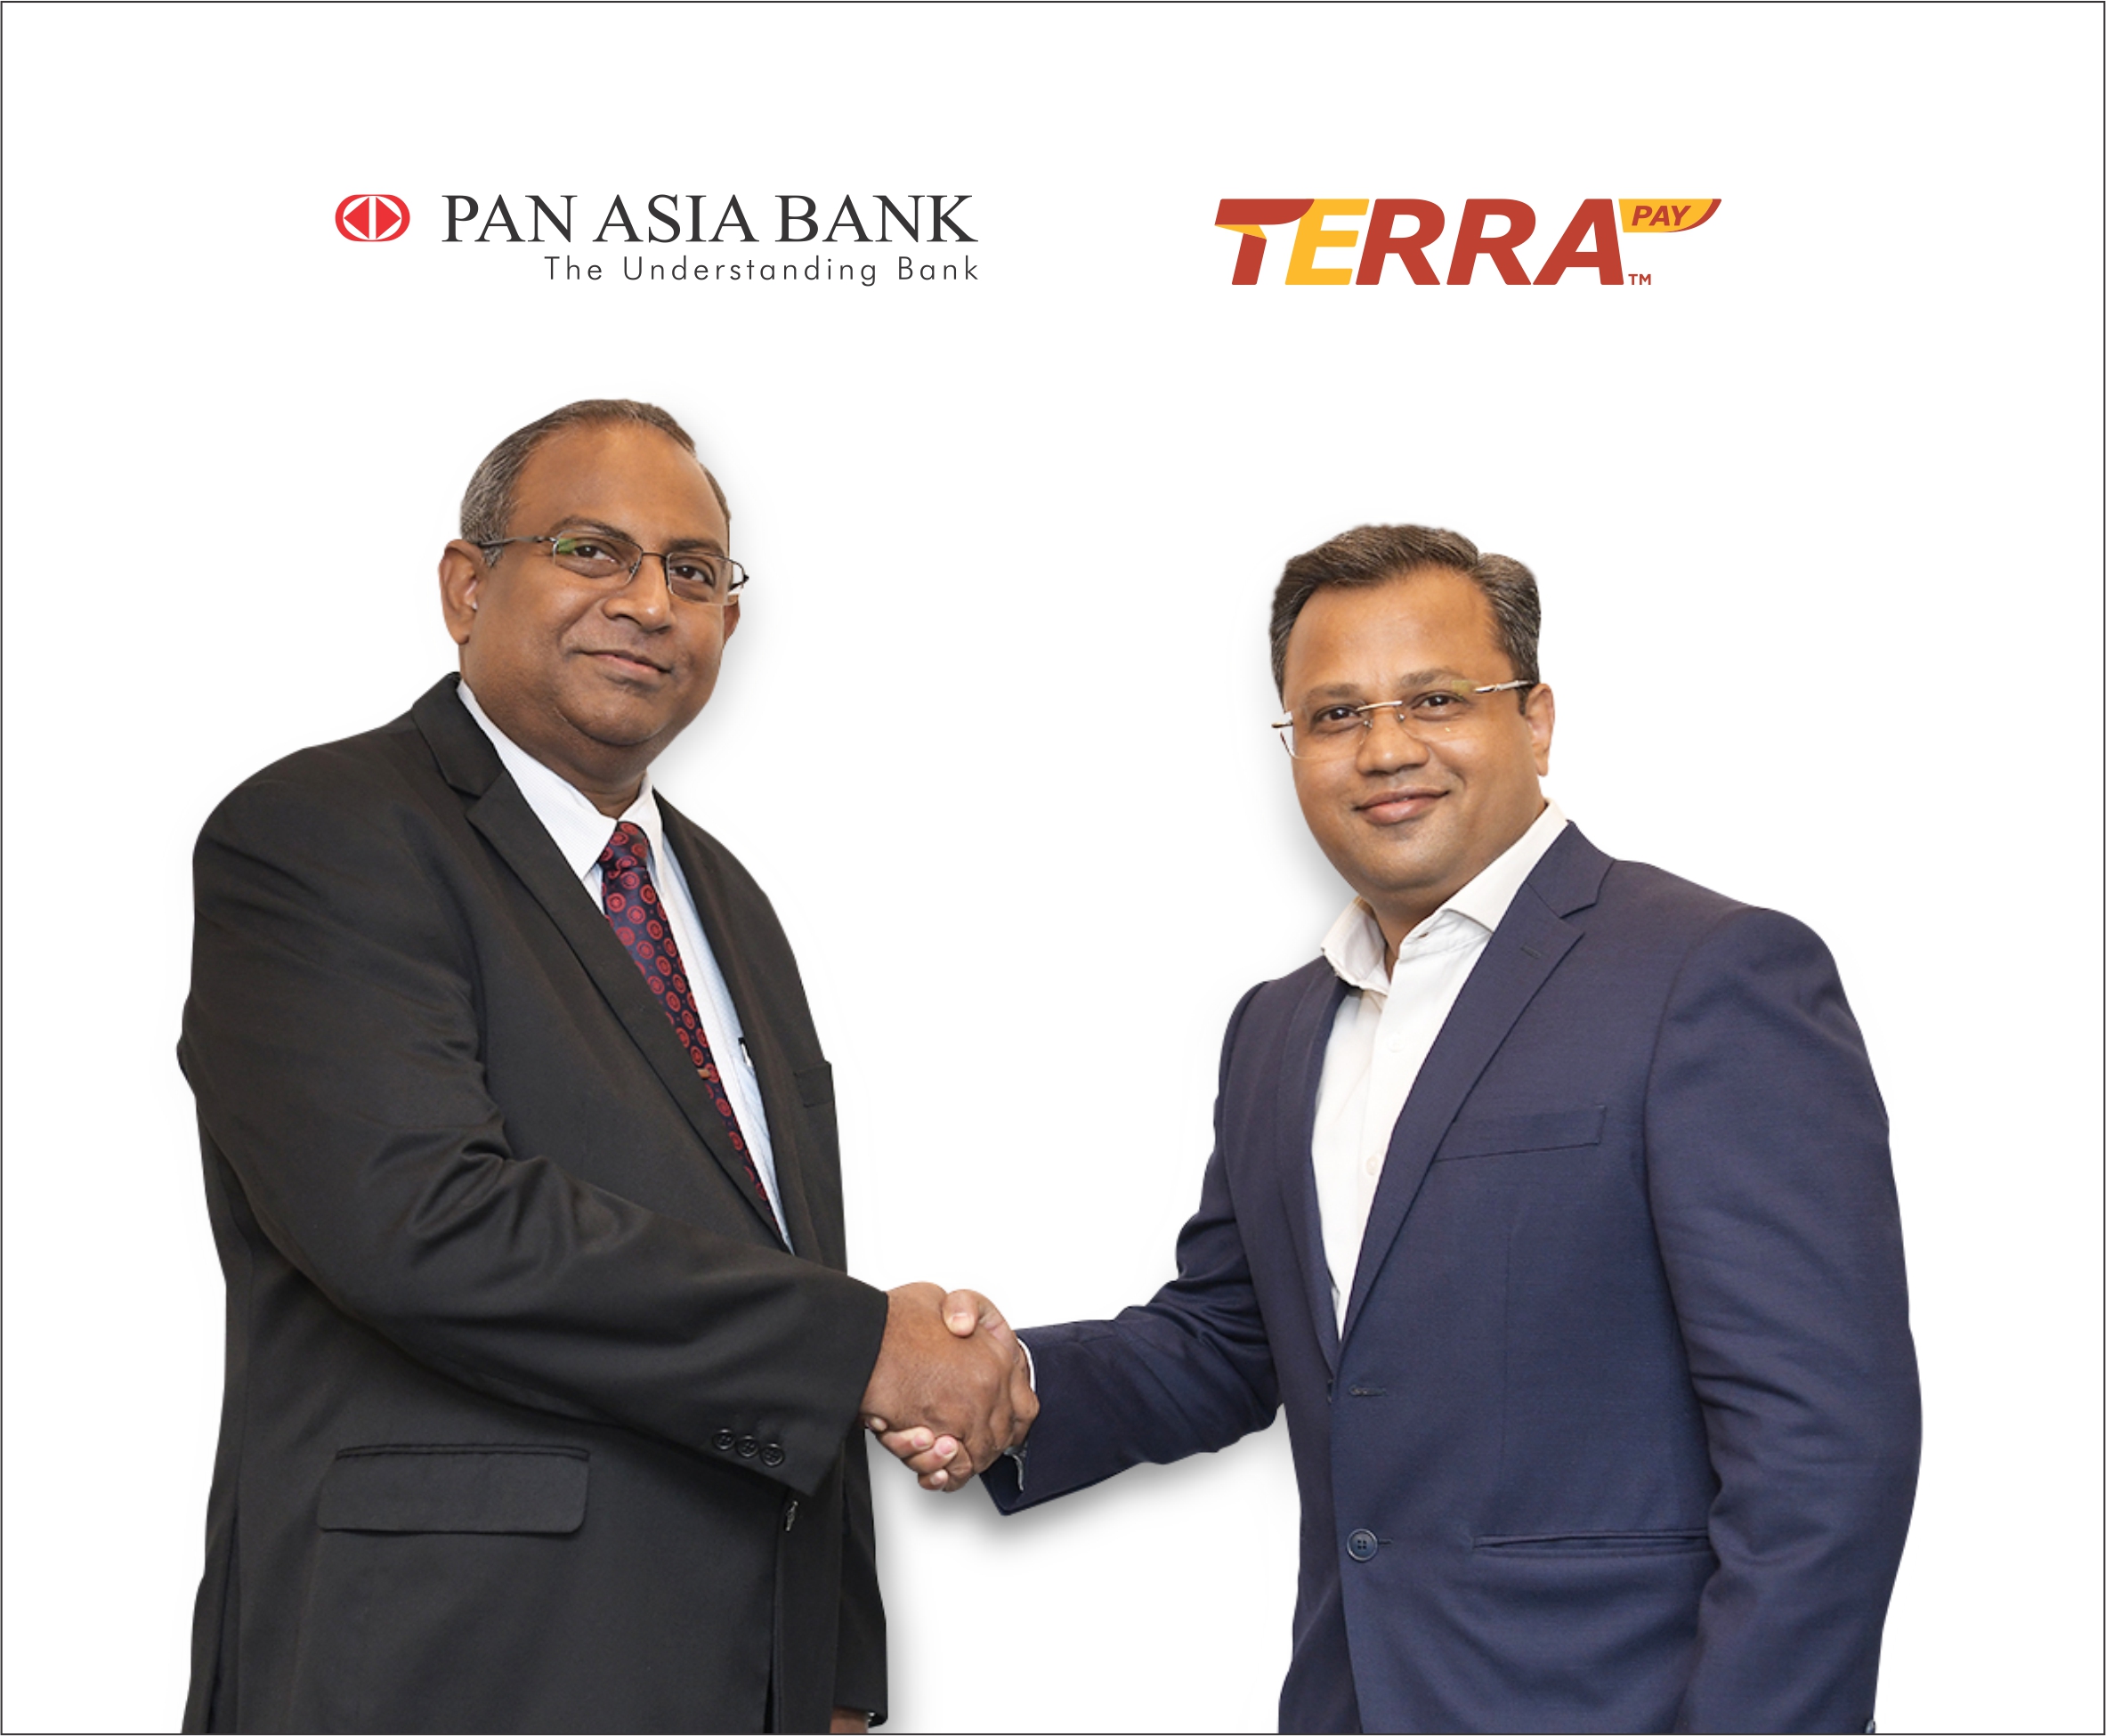 TerraPay expands footprint in Asia, partners with Pan Asia Bank